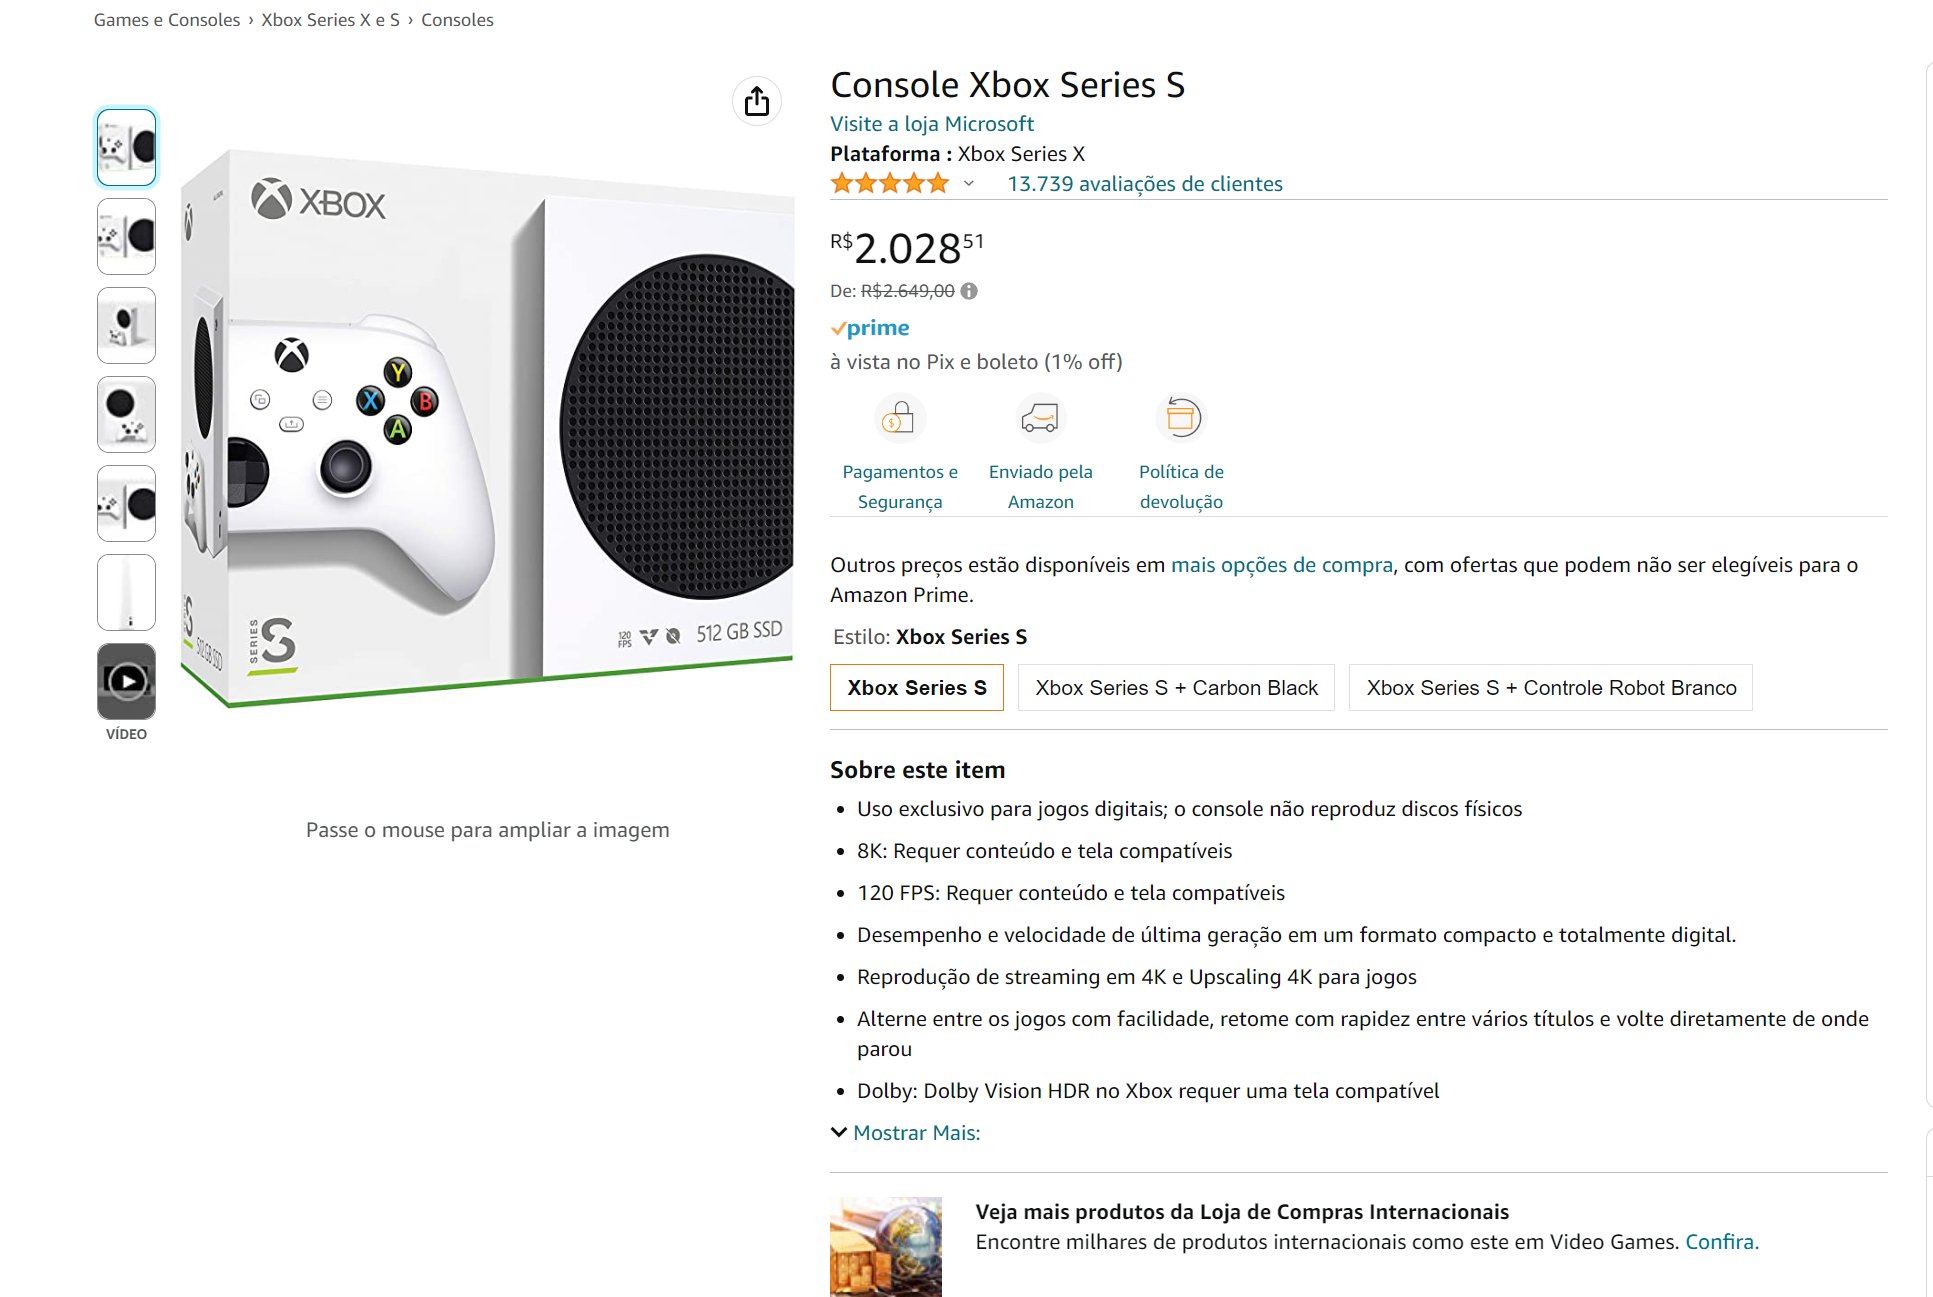 Kodai Young ➡️↘️⬇️↙️⬅️➡️ + ✊ on Twitter: "@Xbox @Seagate Can we get it from  an oficial source here in brazil instead of beying scammed? Series S is  huge here but it's almost